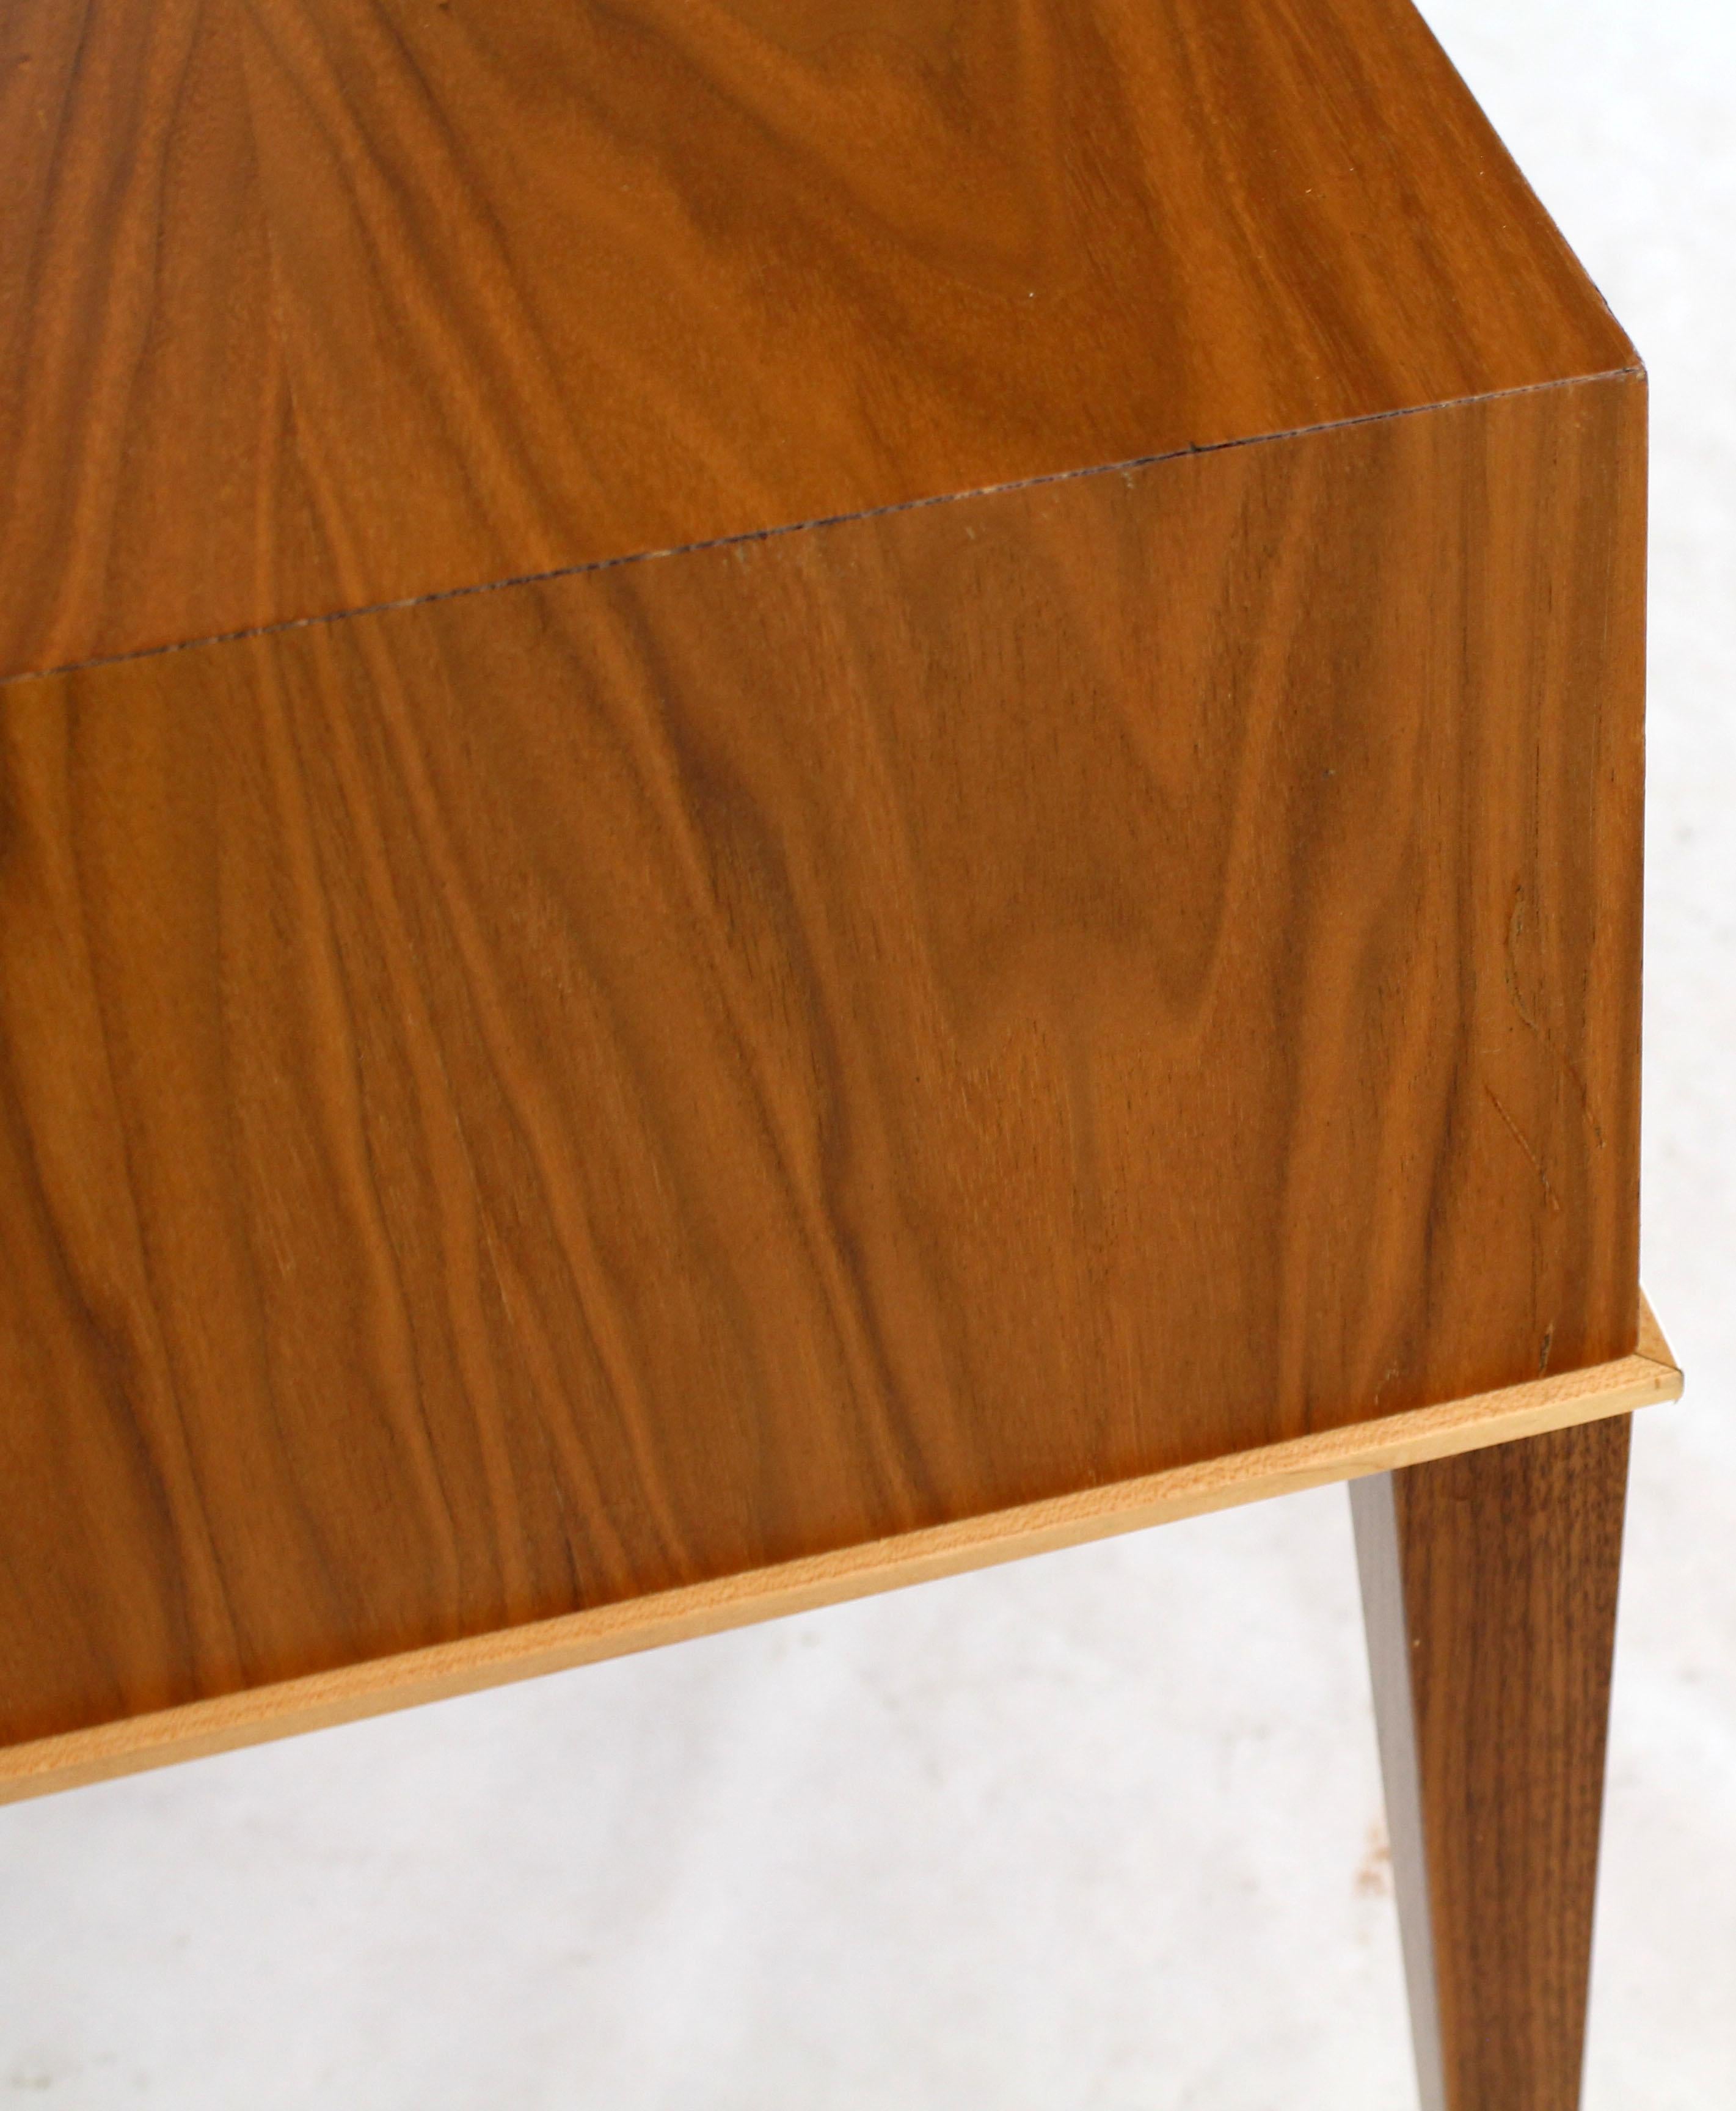 20th Century Walnut Six-Legged Console Table on Tapered Legs Parzinger Style For Sale